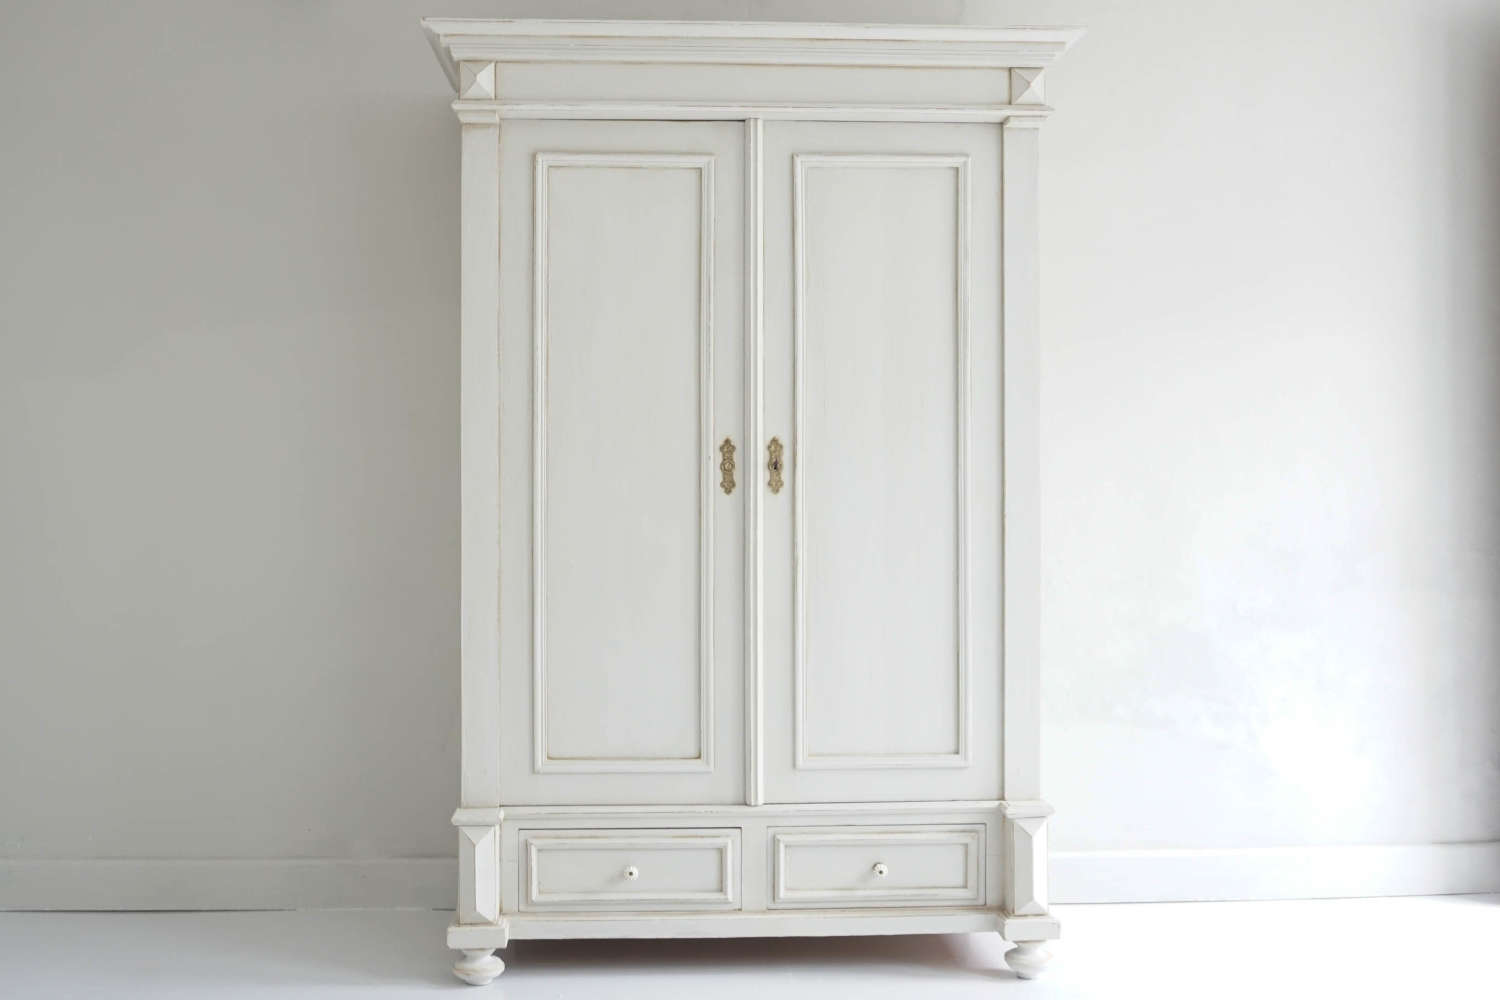 Painted Continental Wardrobe/Cupboard